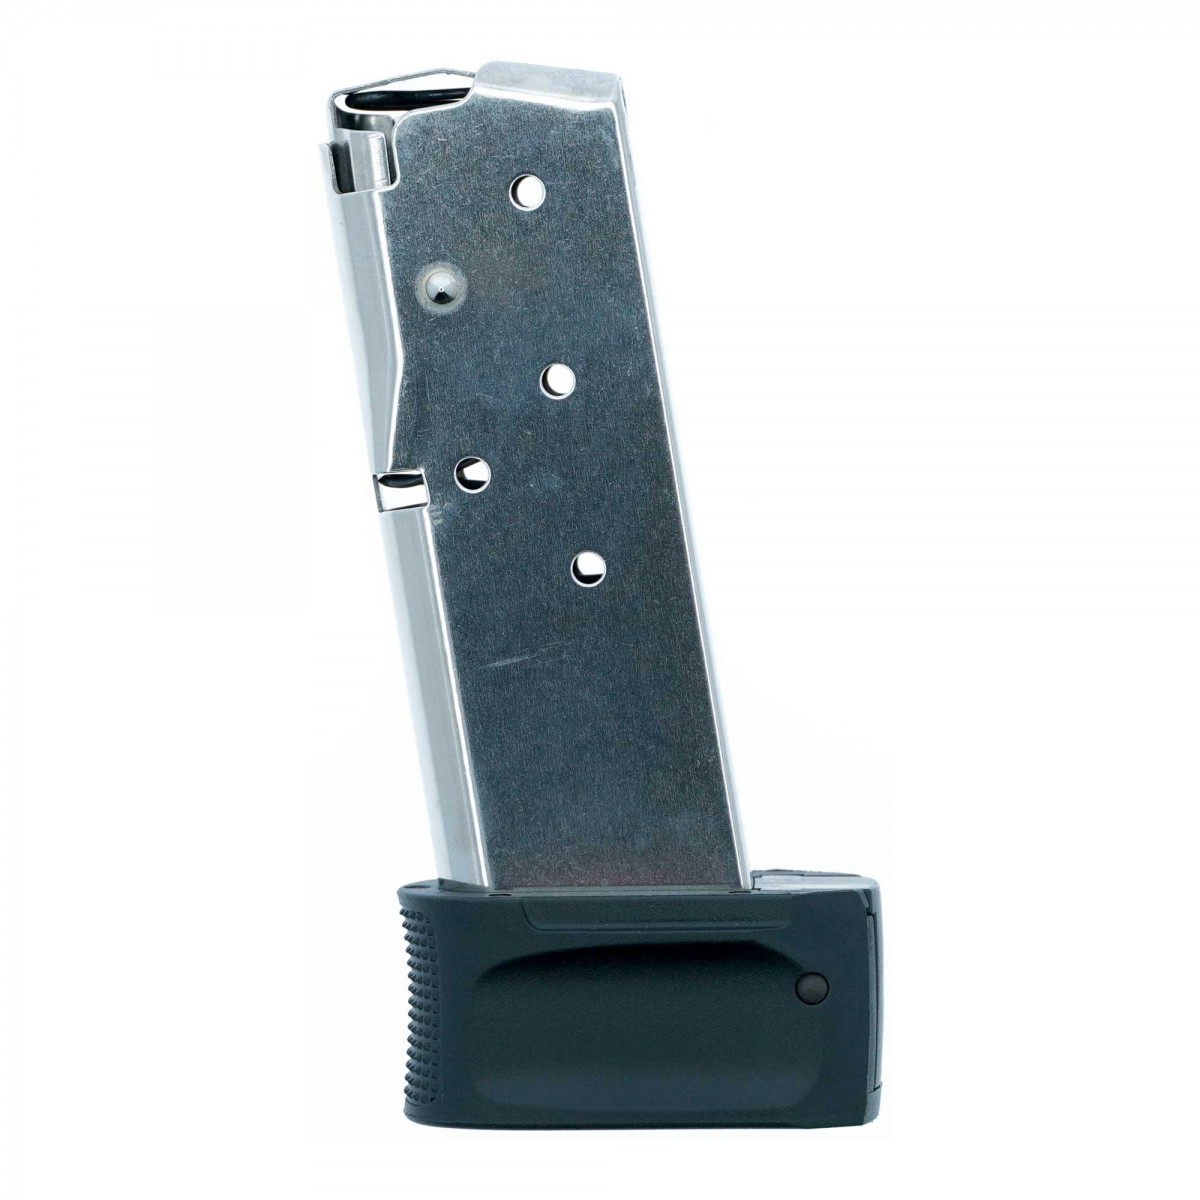 Durable and Reliable FAST SHIP Beretta Magazine 9MM 8Rd Fits Beretta APX Carry 